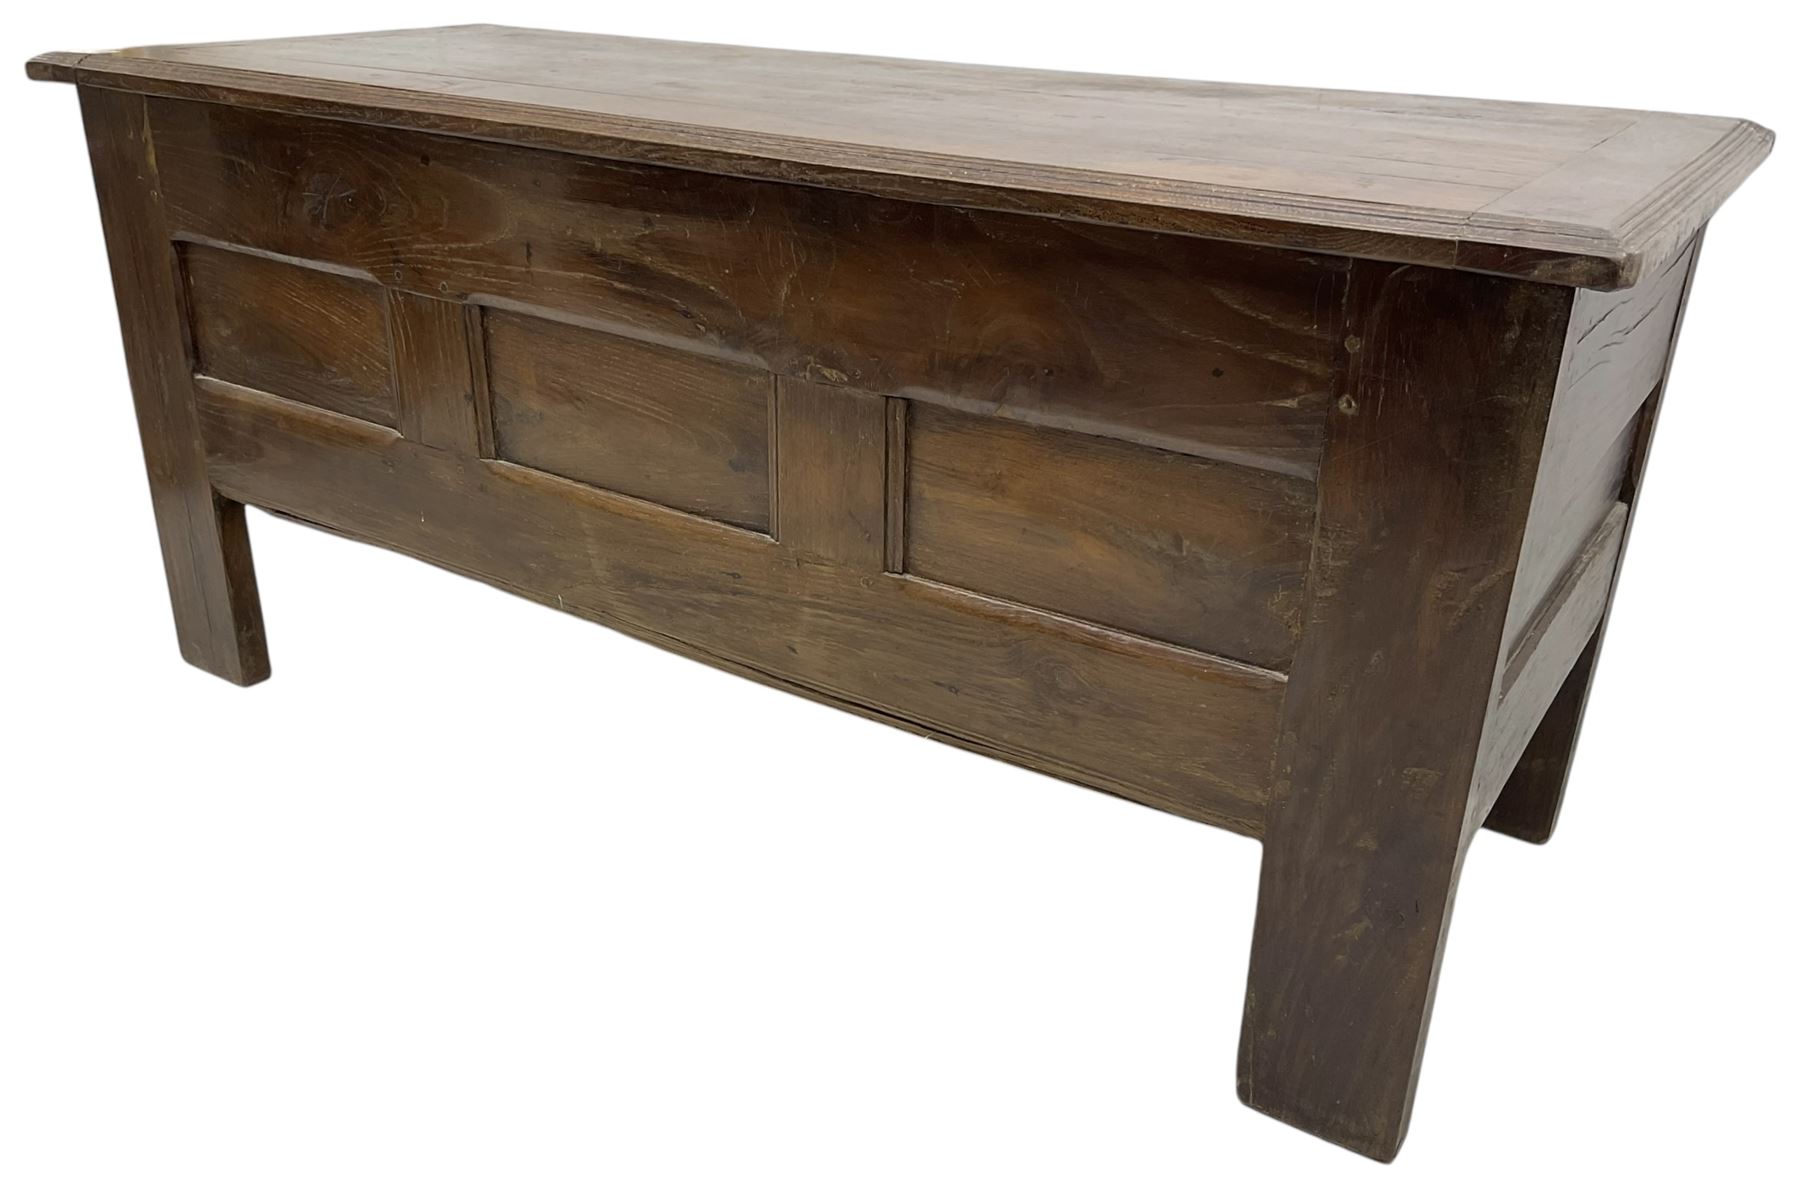 Large 18th century oak coffer or chest - Image 6 of 9